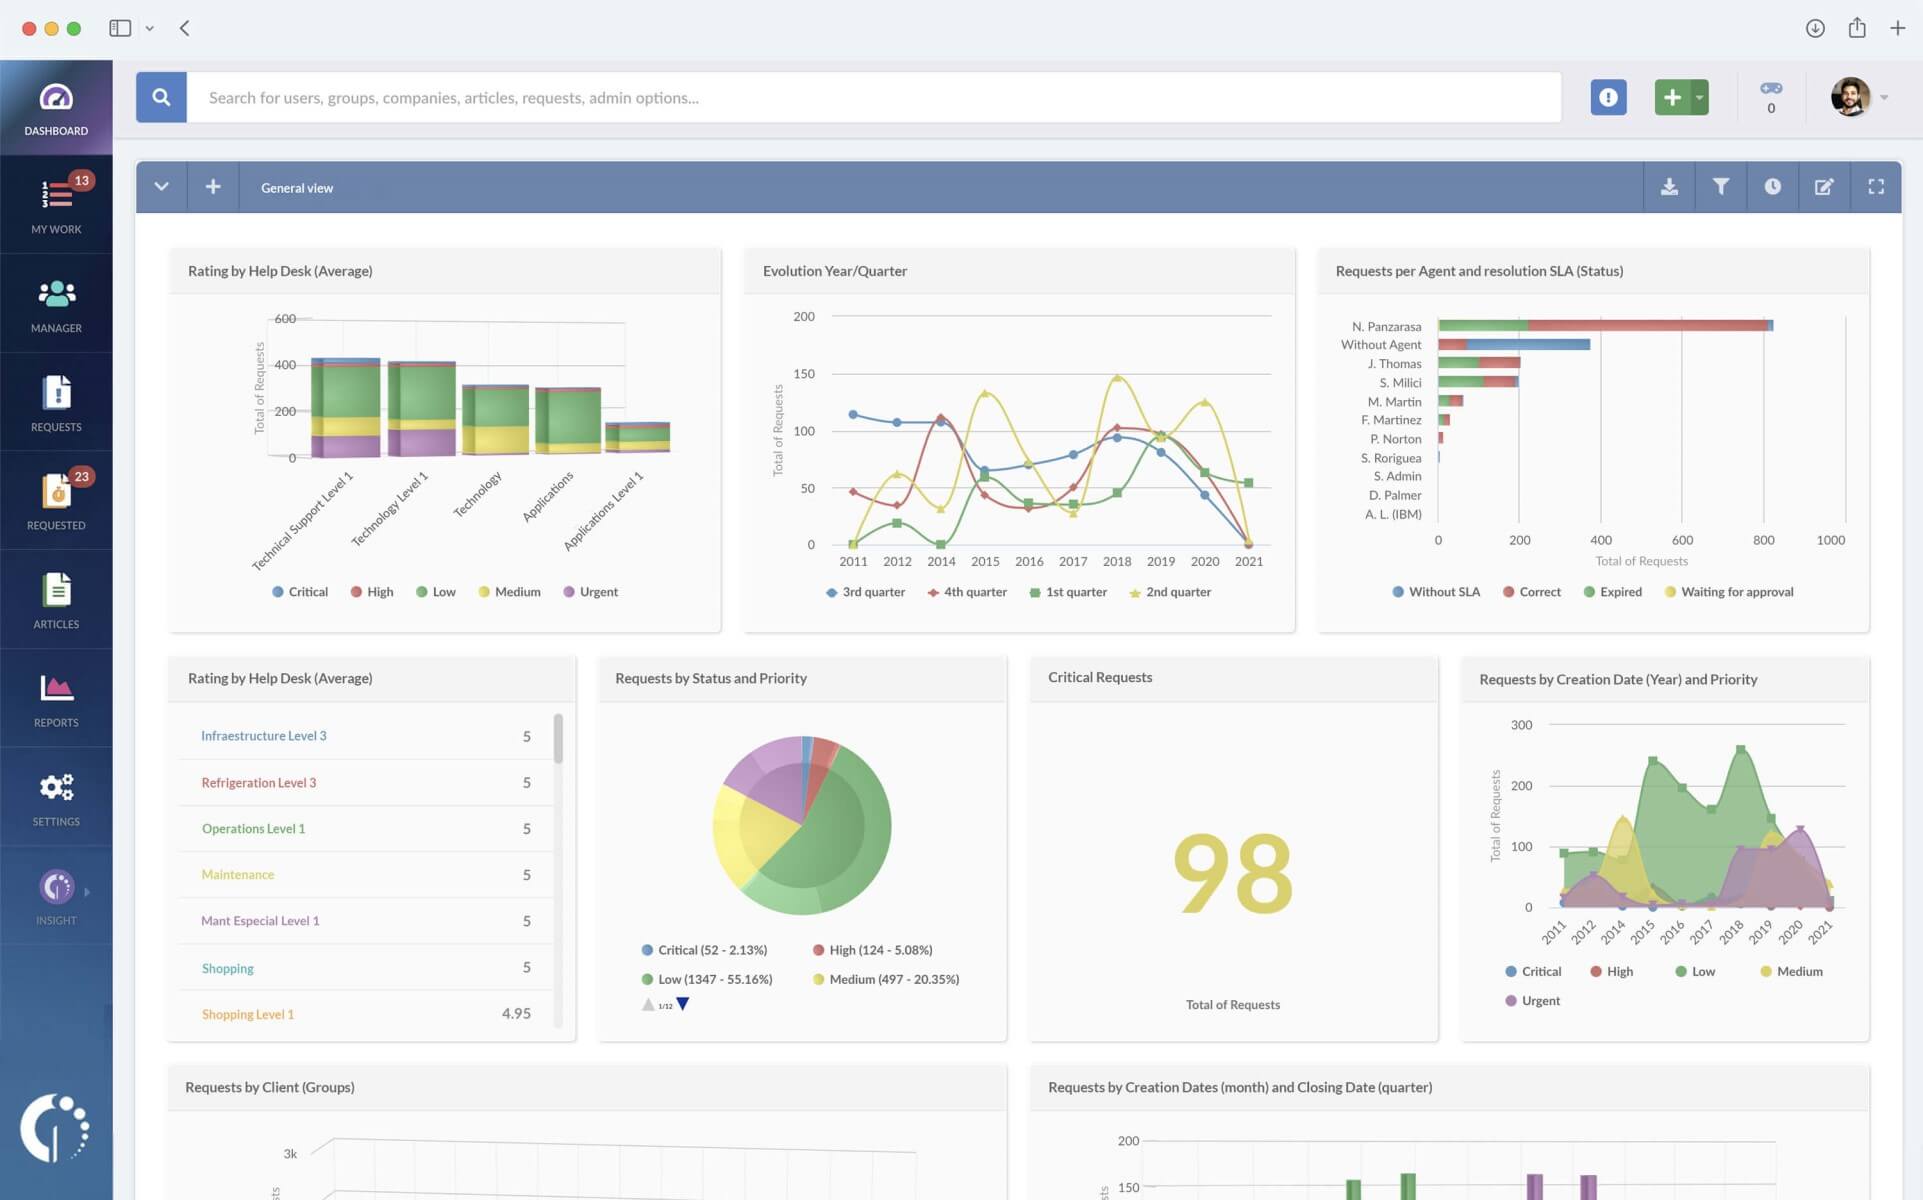 Information and KPIs shown in several dashboards of InvGate Service Desk